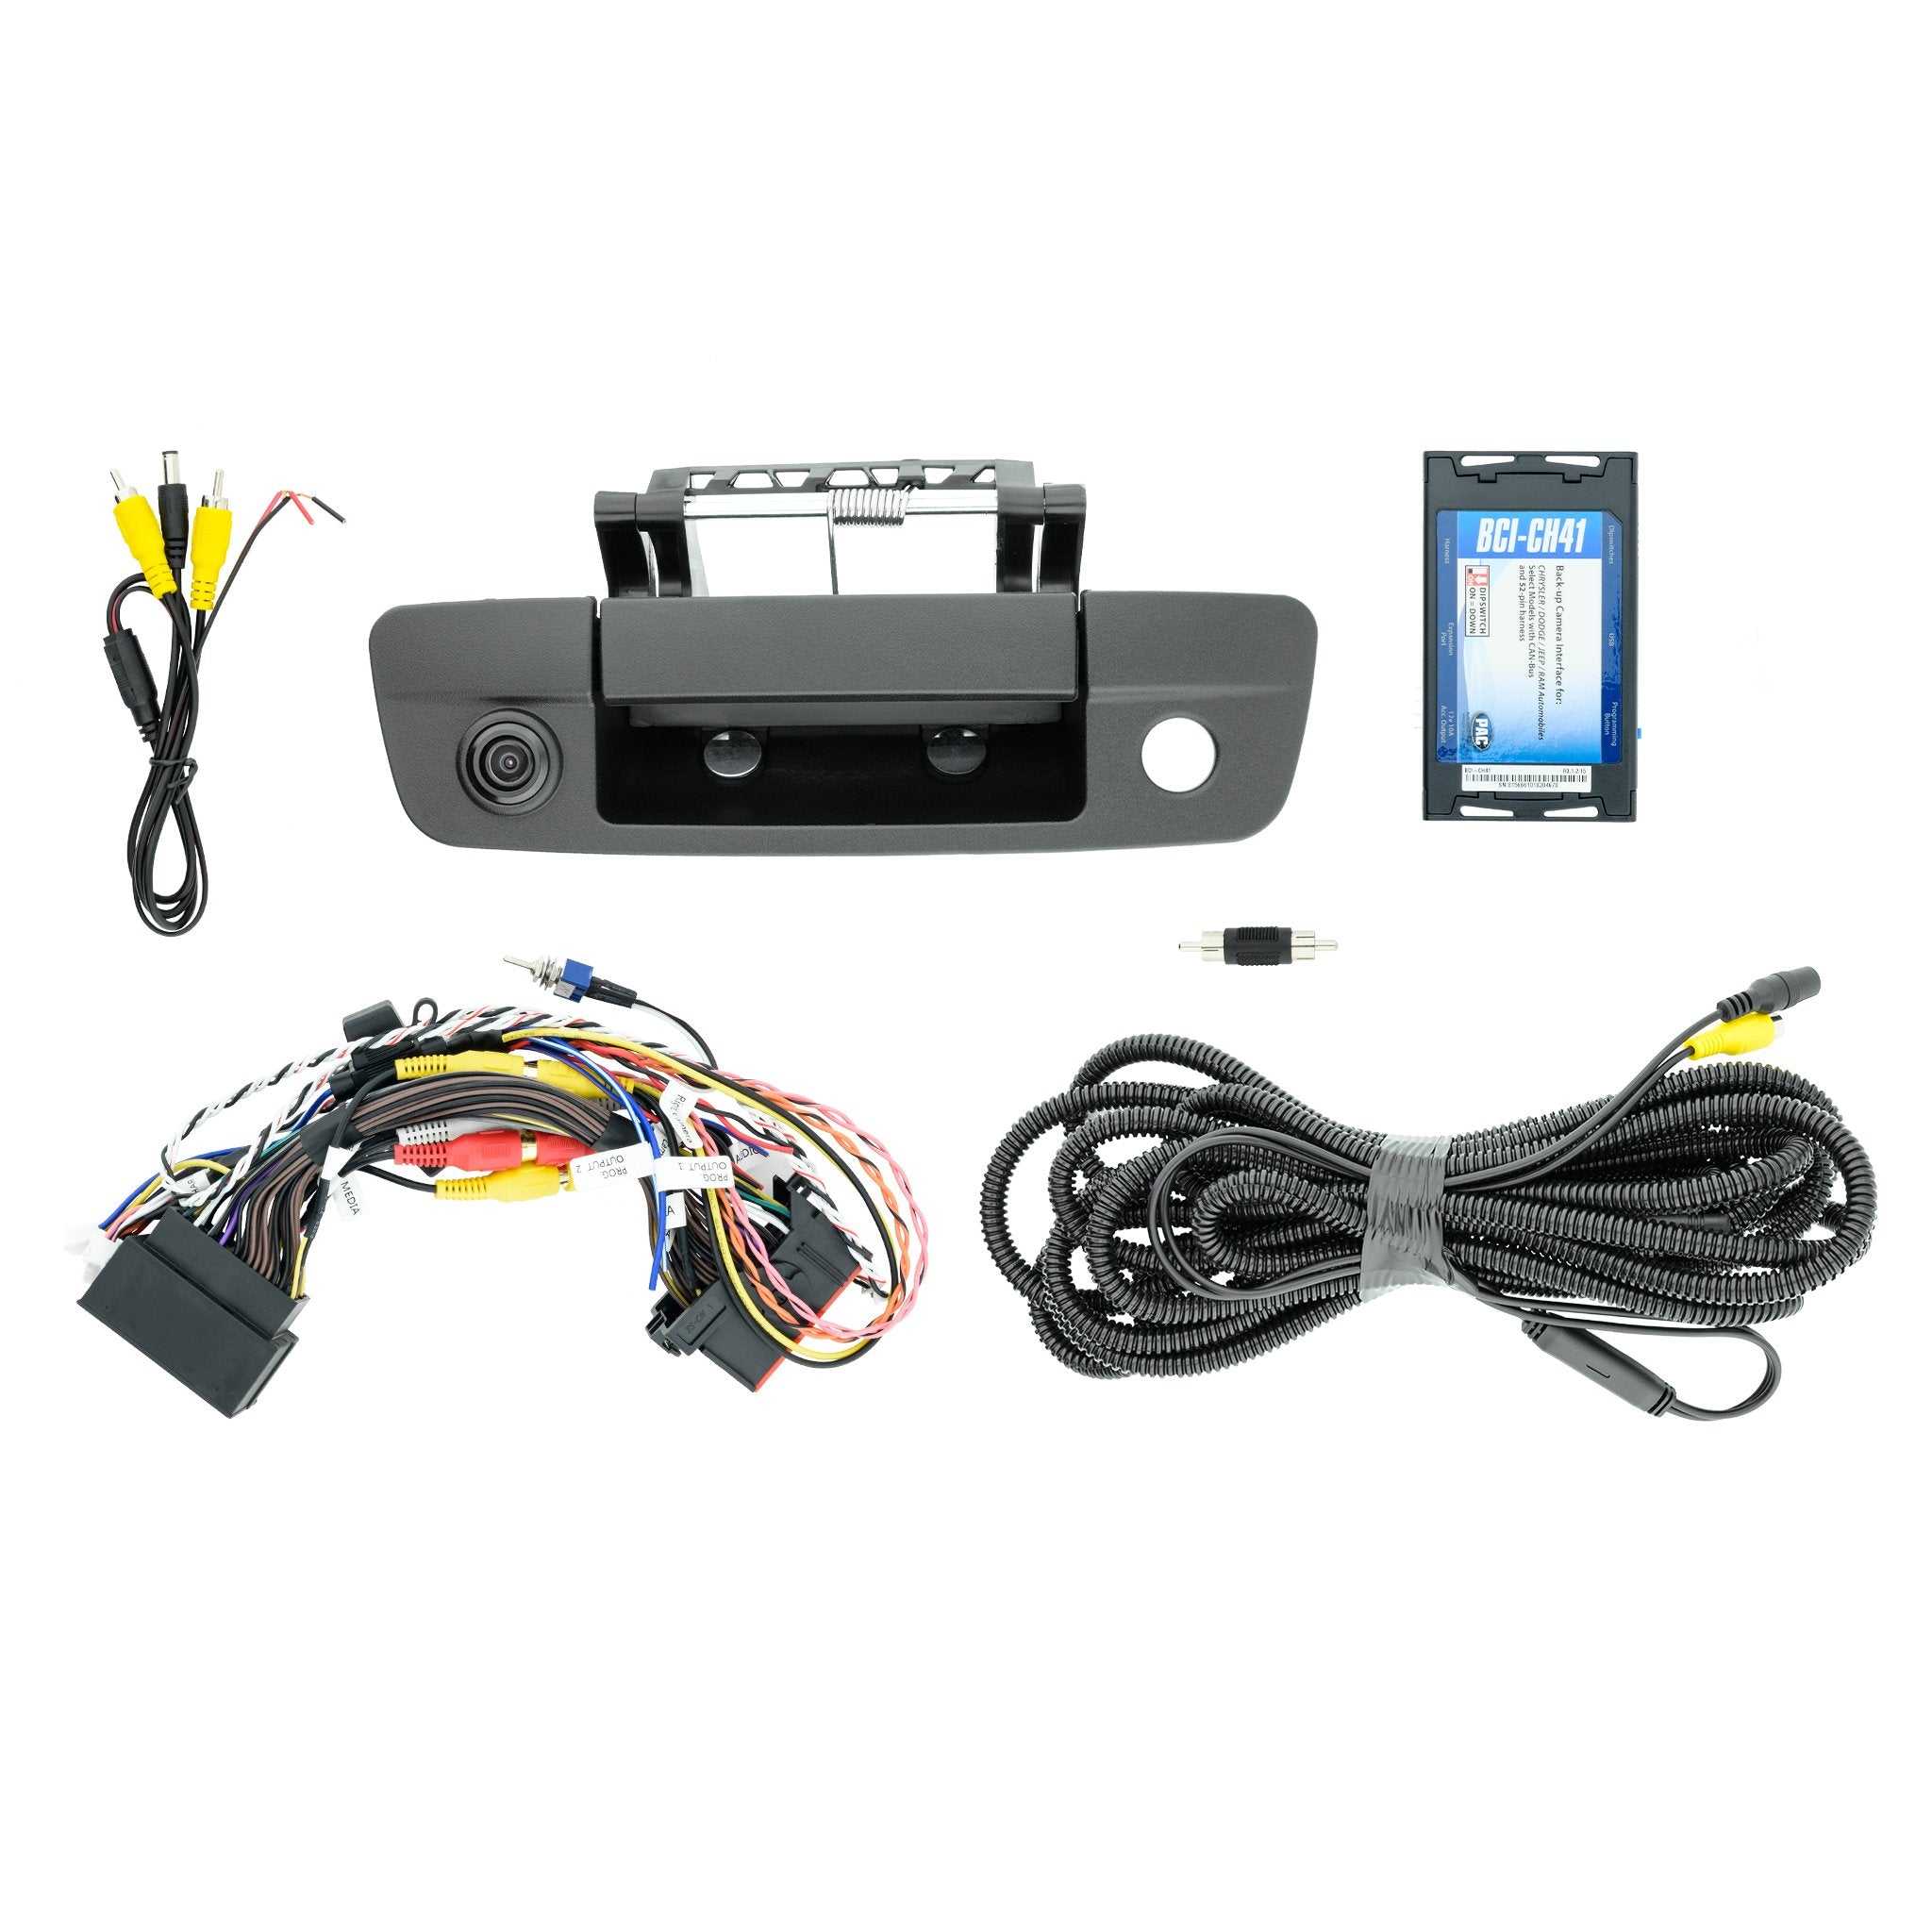 Dodge Ram/RAM Trucks (2013-2017) Backup Camera Kit with Tailgate with Plug-and-Play Interface